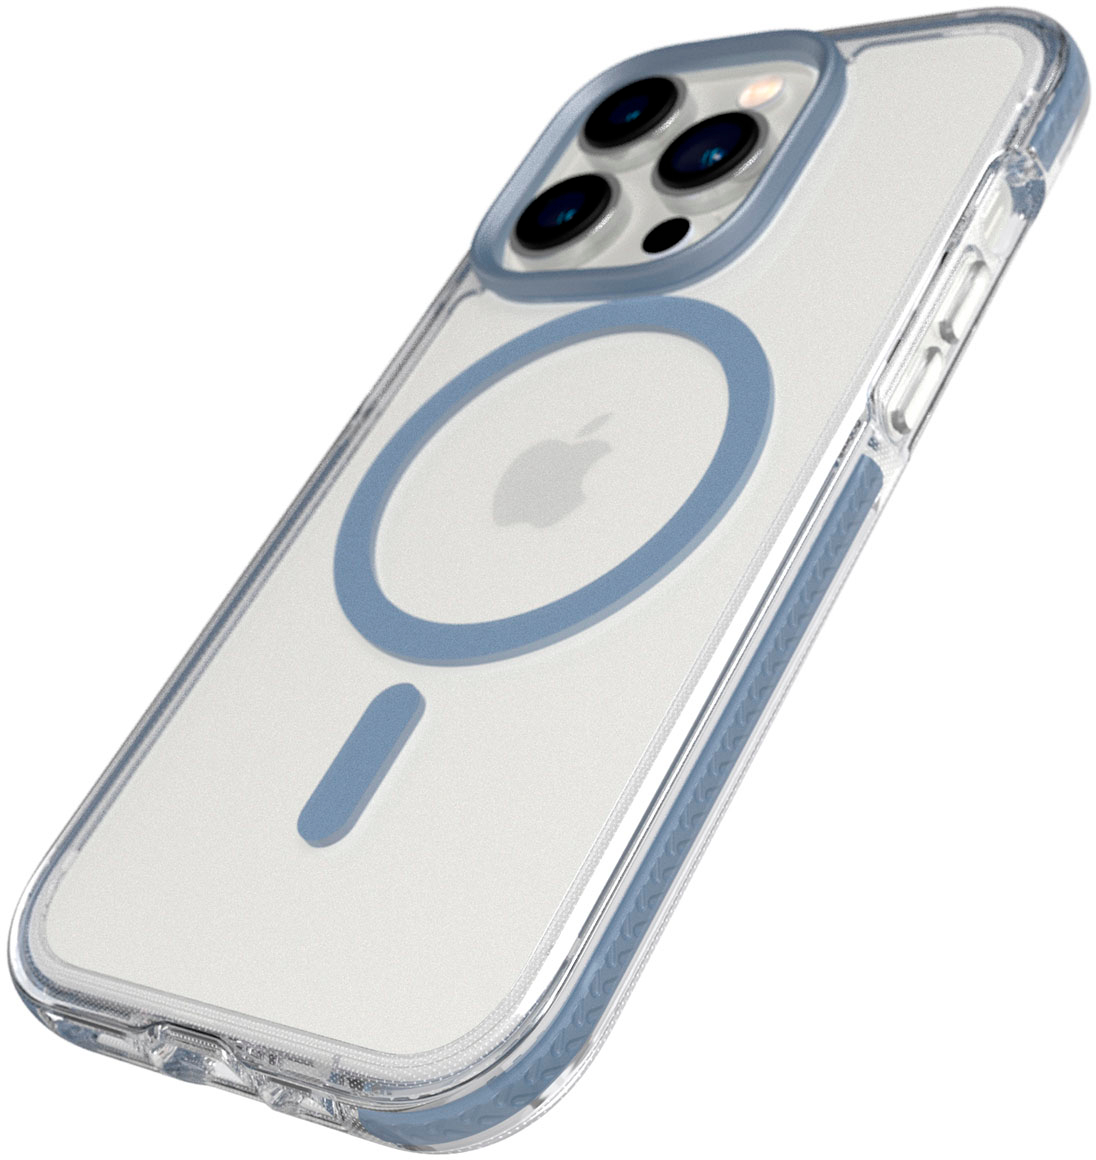 iPhone 14 Krystec™ Clear Case with MagSafe